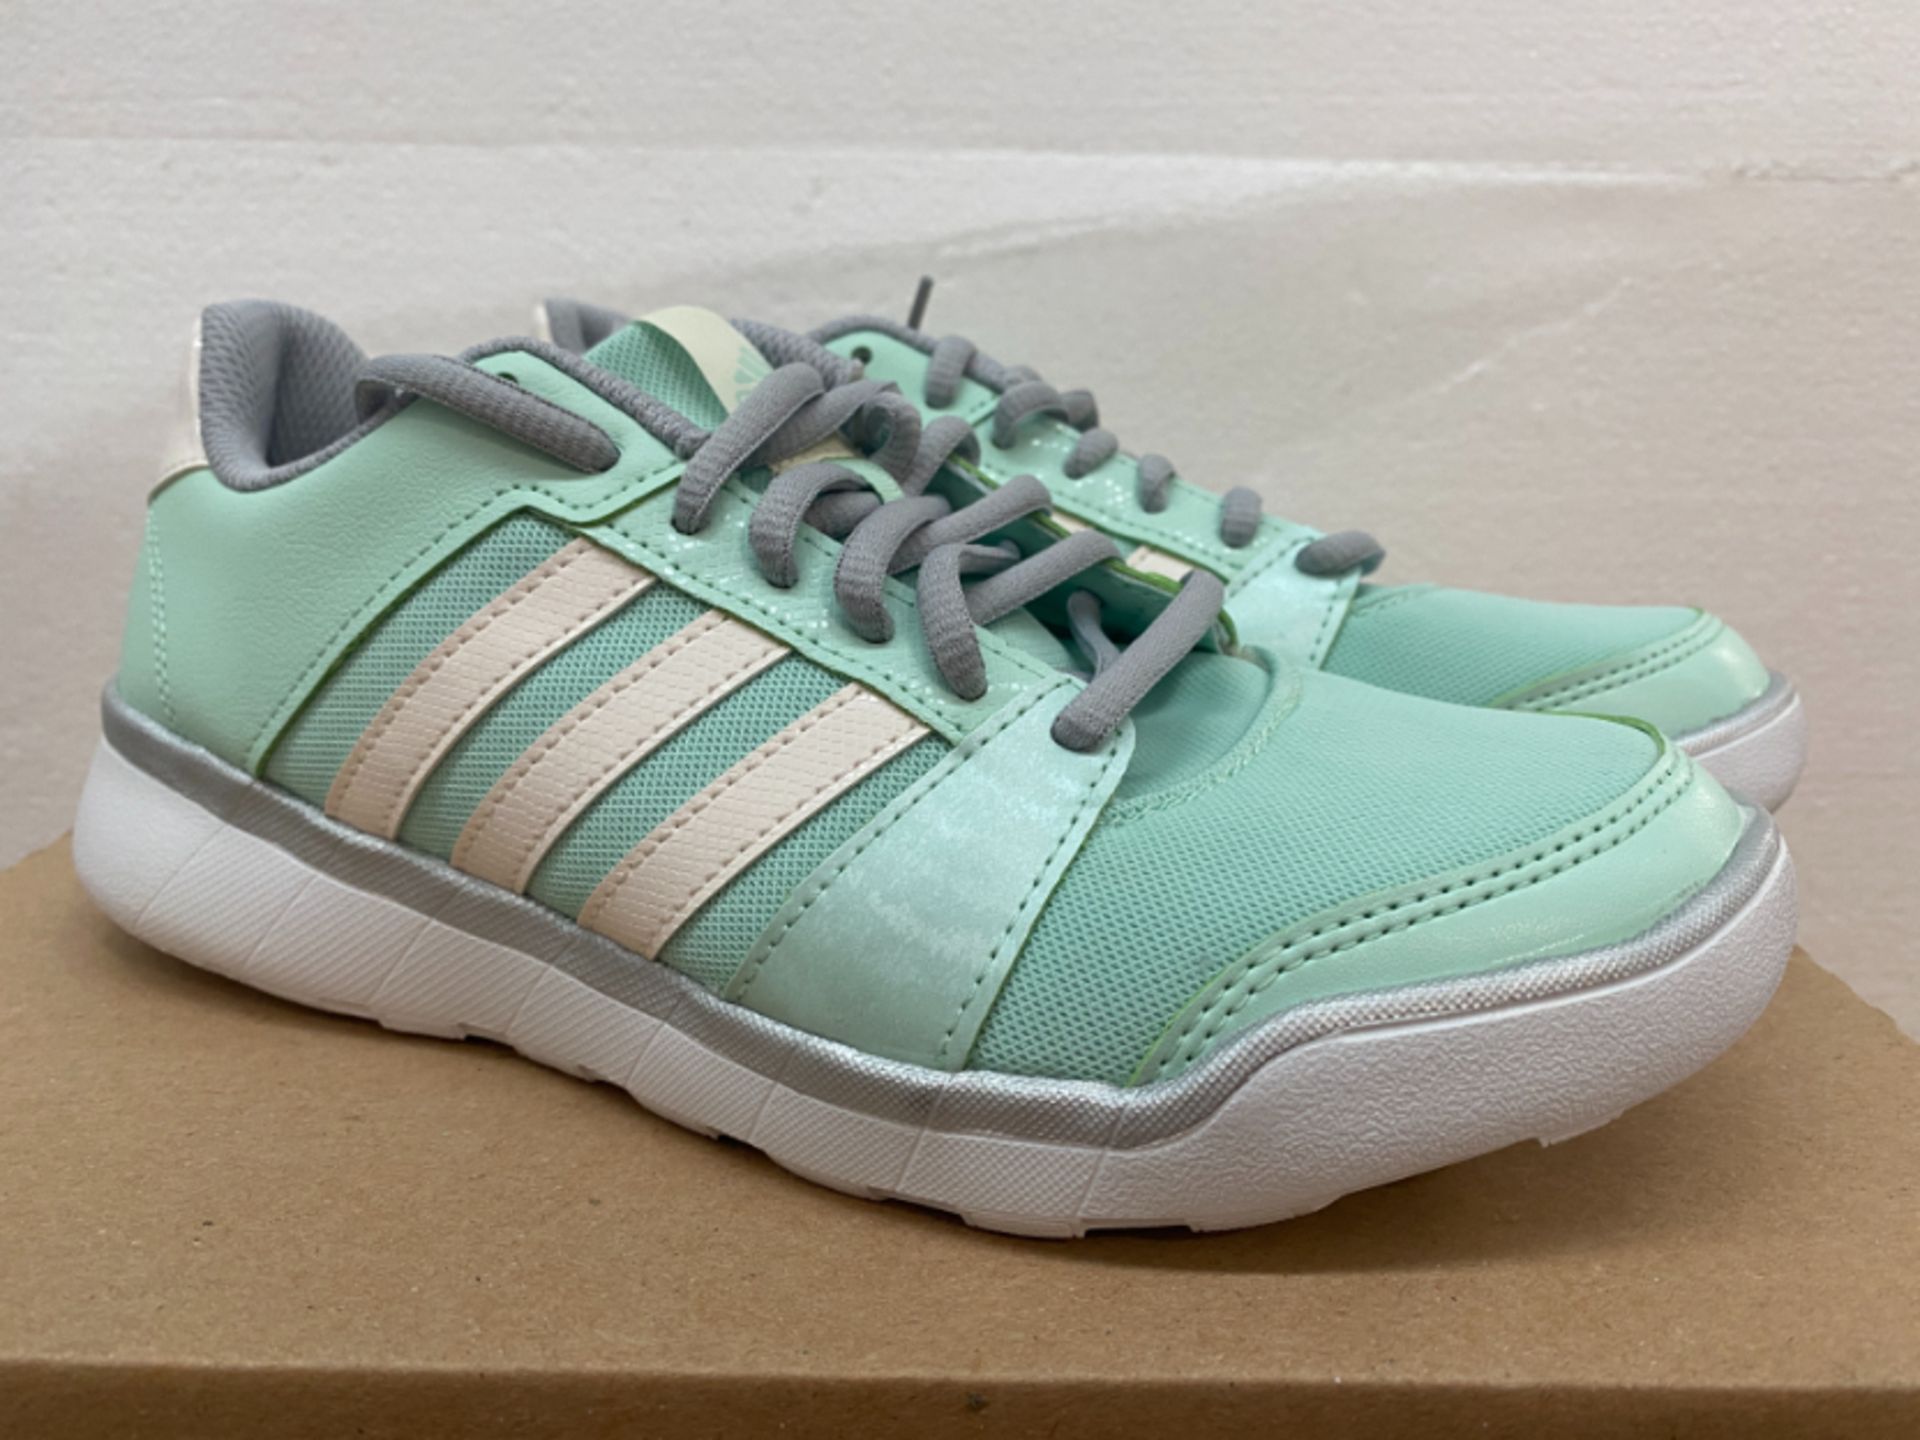 1 LOT TO CONTAIN AN AS NEW BOXED PAIR OF ADIDAS UK SIZE 4 ESSENTIAL FUN TRAINING SHOE IN MINT